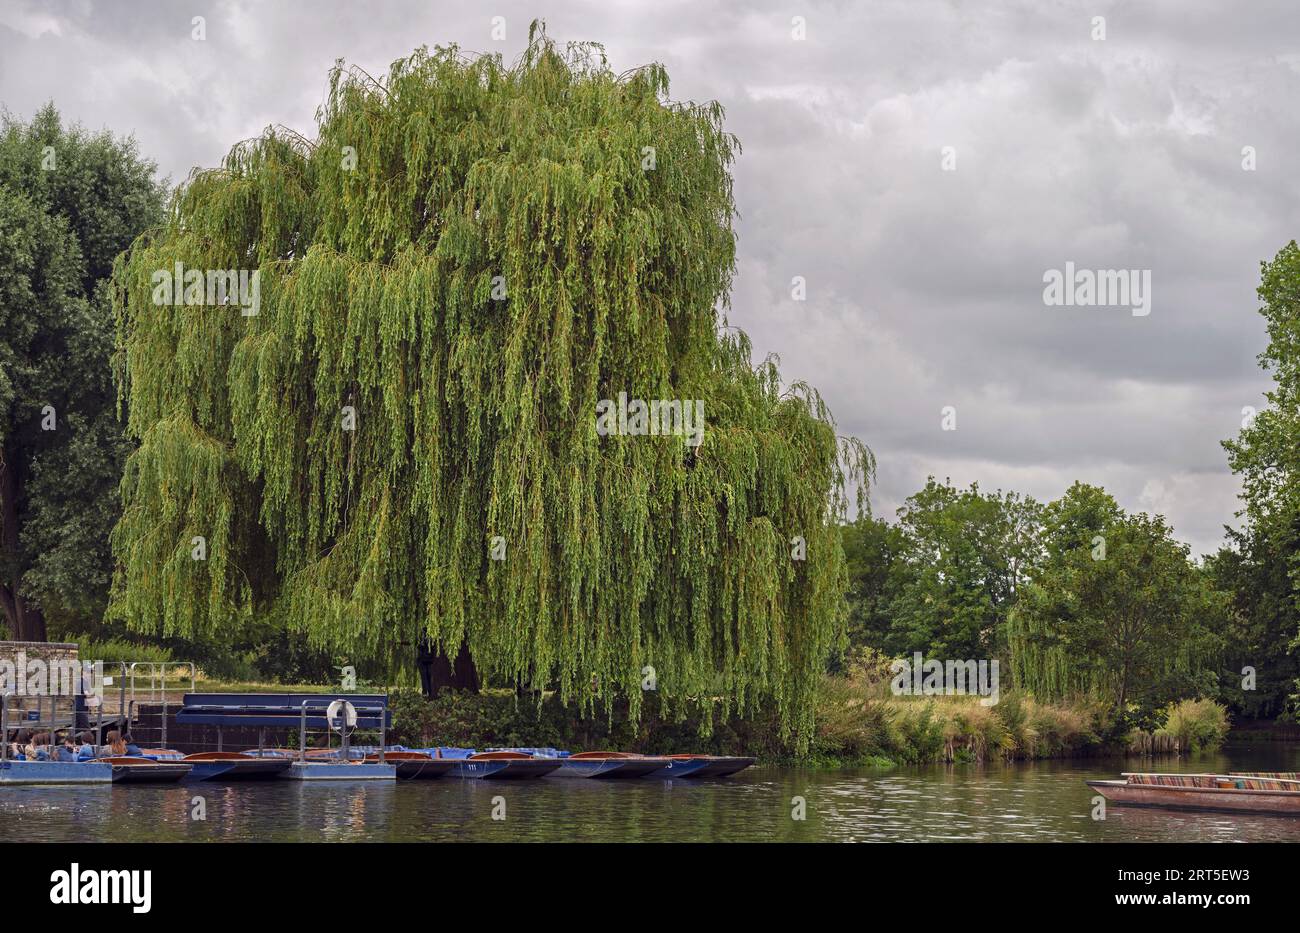 giant weeping willow tree drapes over the River Cam in Cambridge UK above a punting dock with a cloudy sky in the background Stock Photo